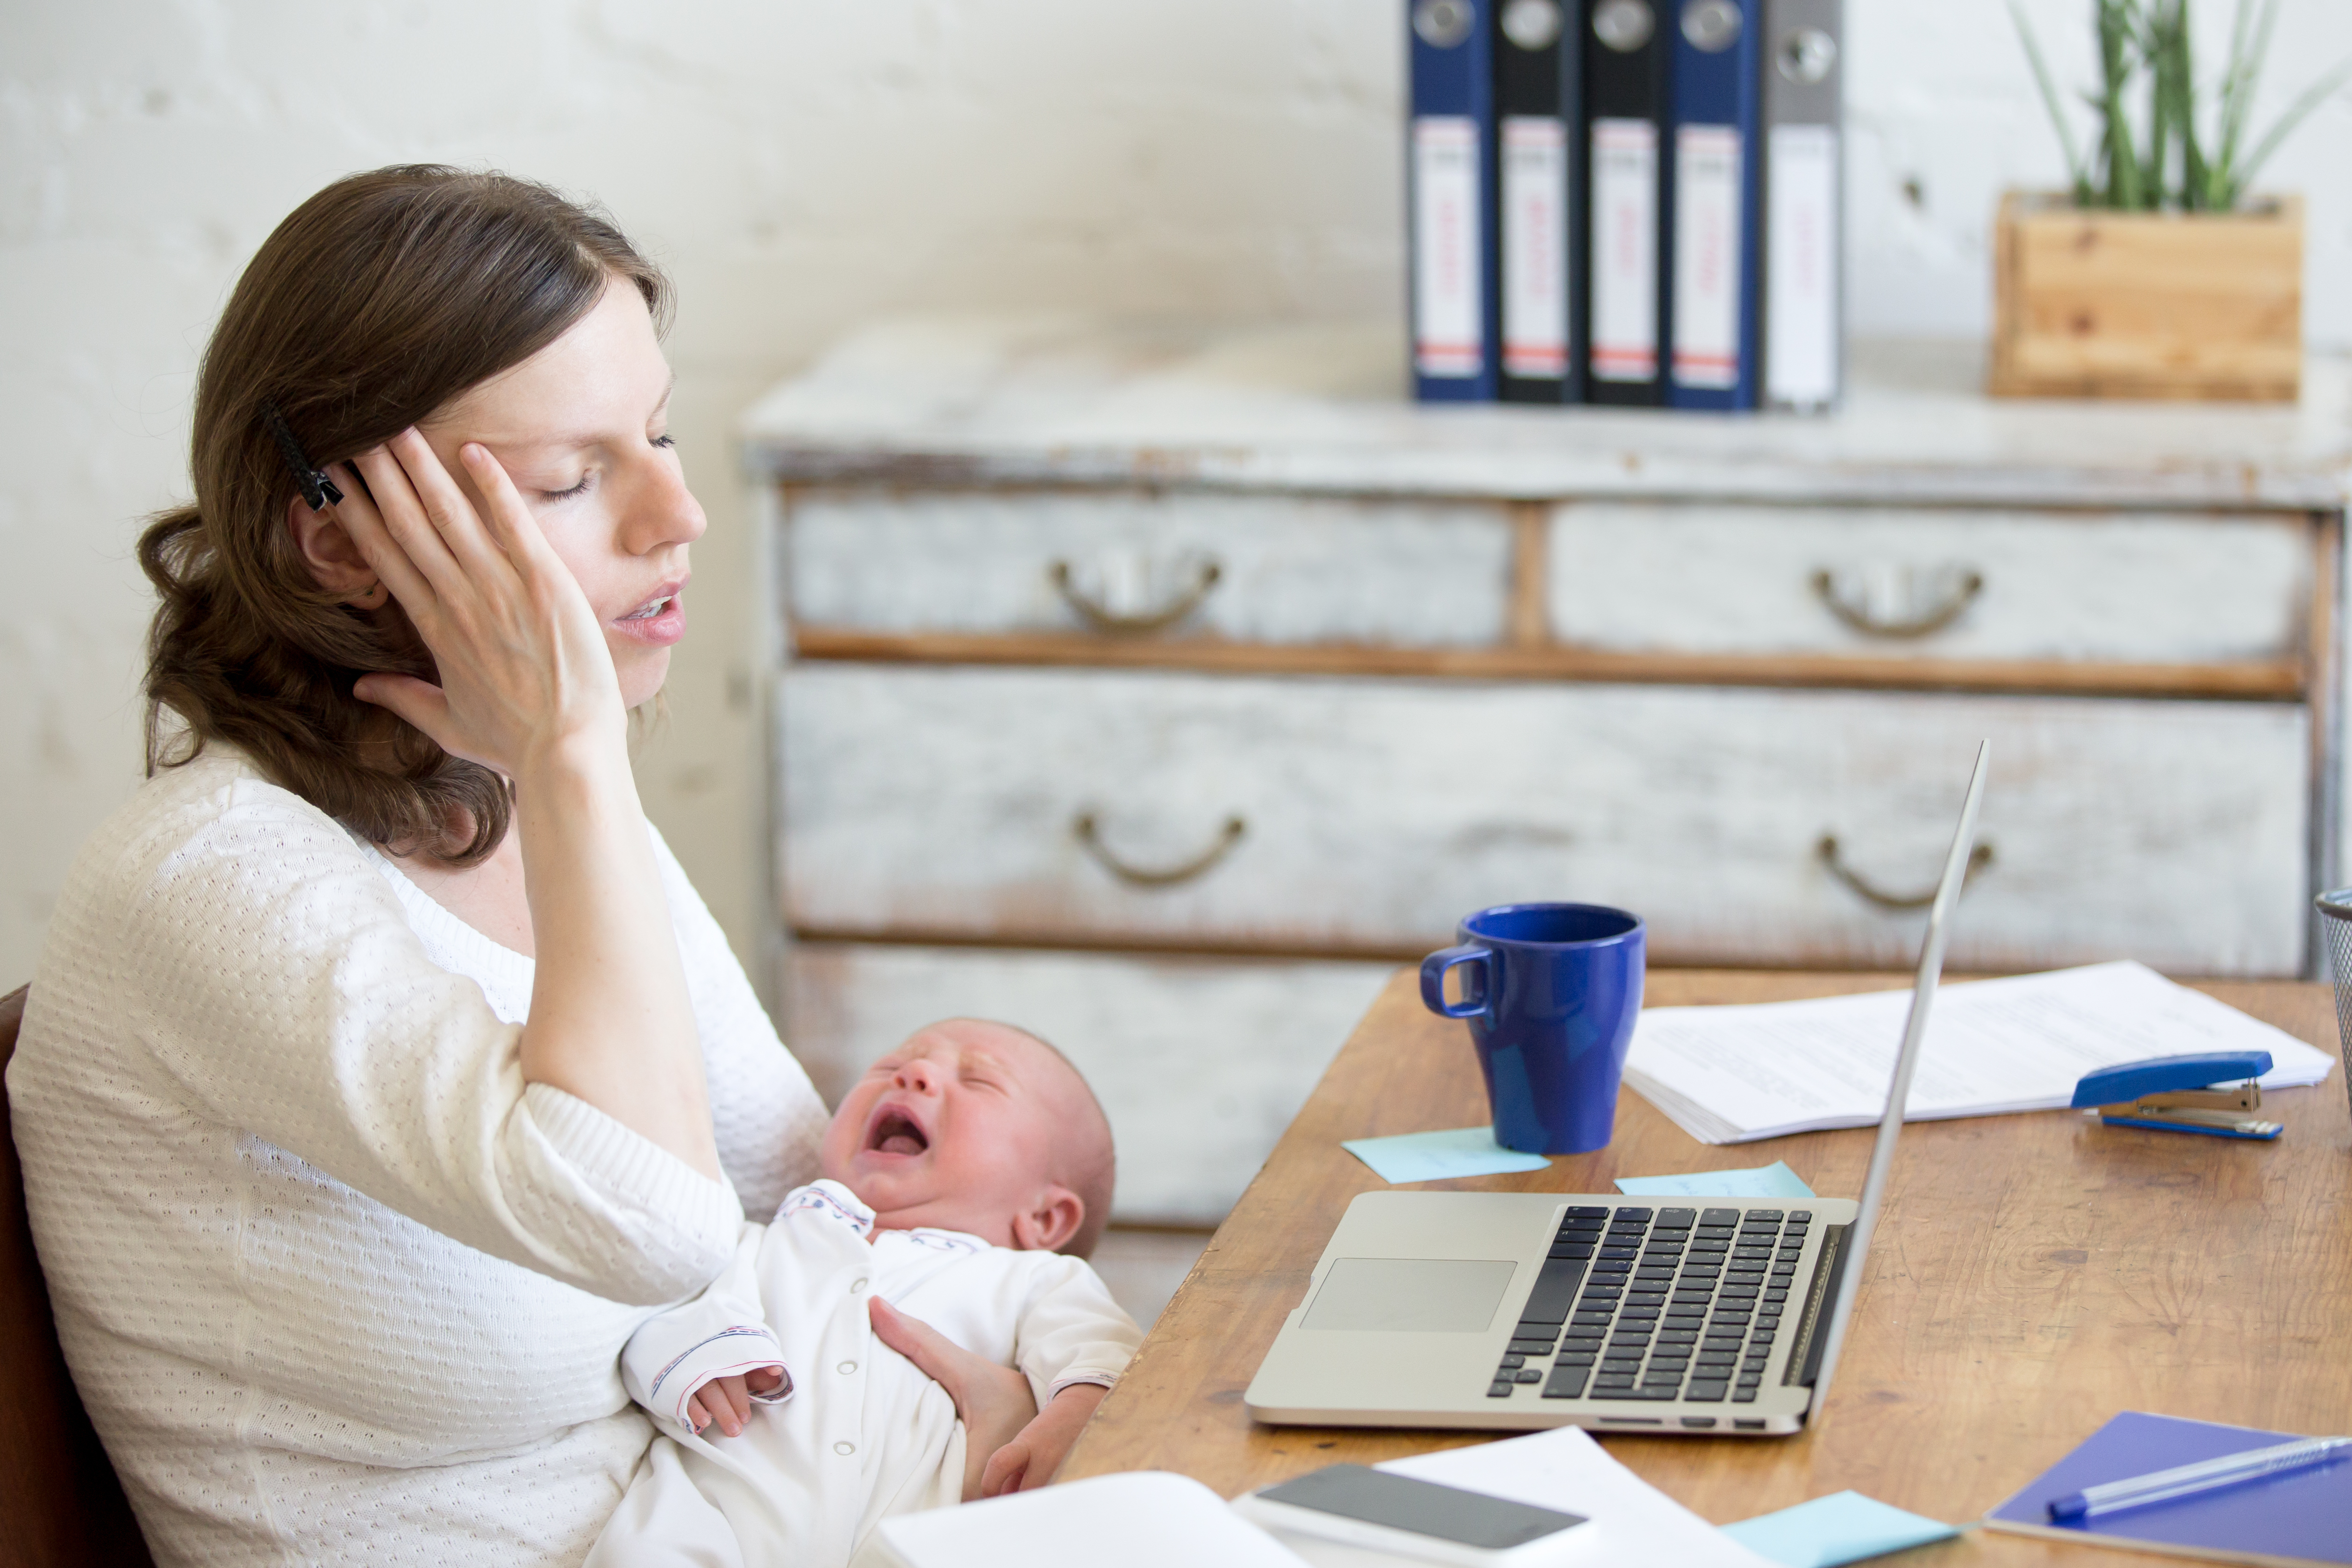 A stressed mother | Source: Shutterstock